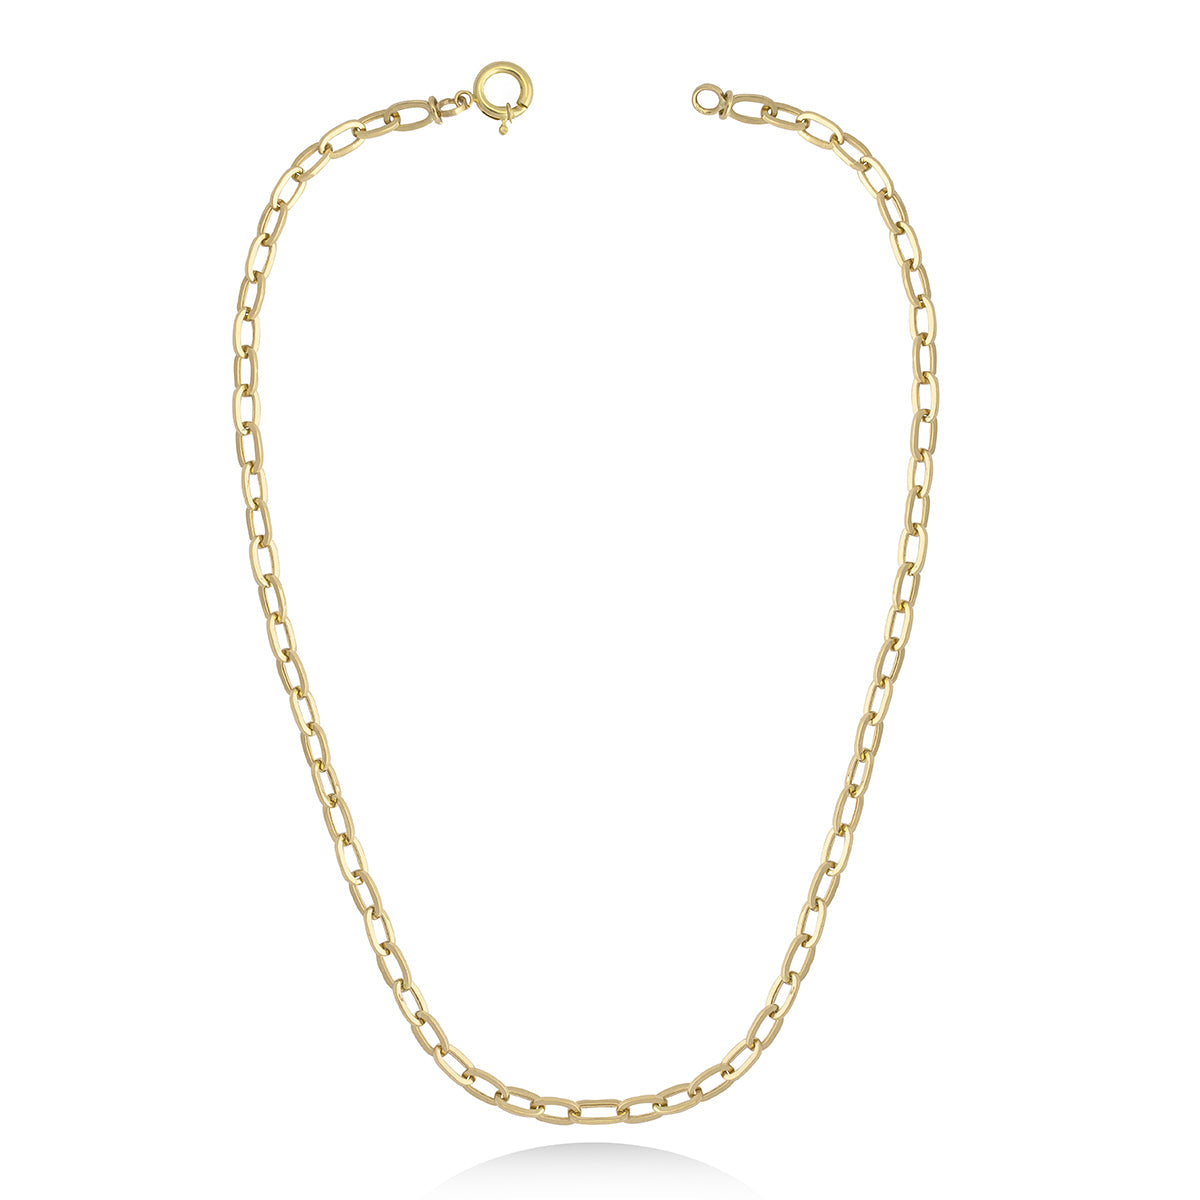 Royal Link chain Necklace in 18k Yellow gold